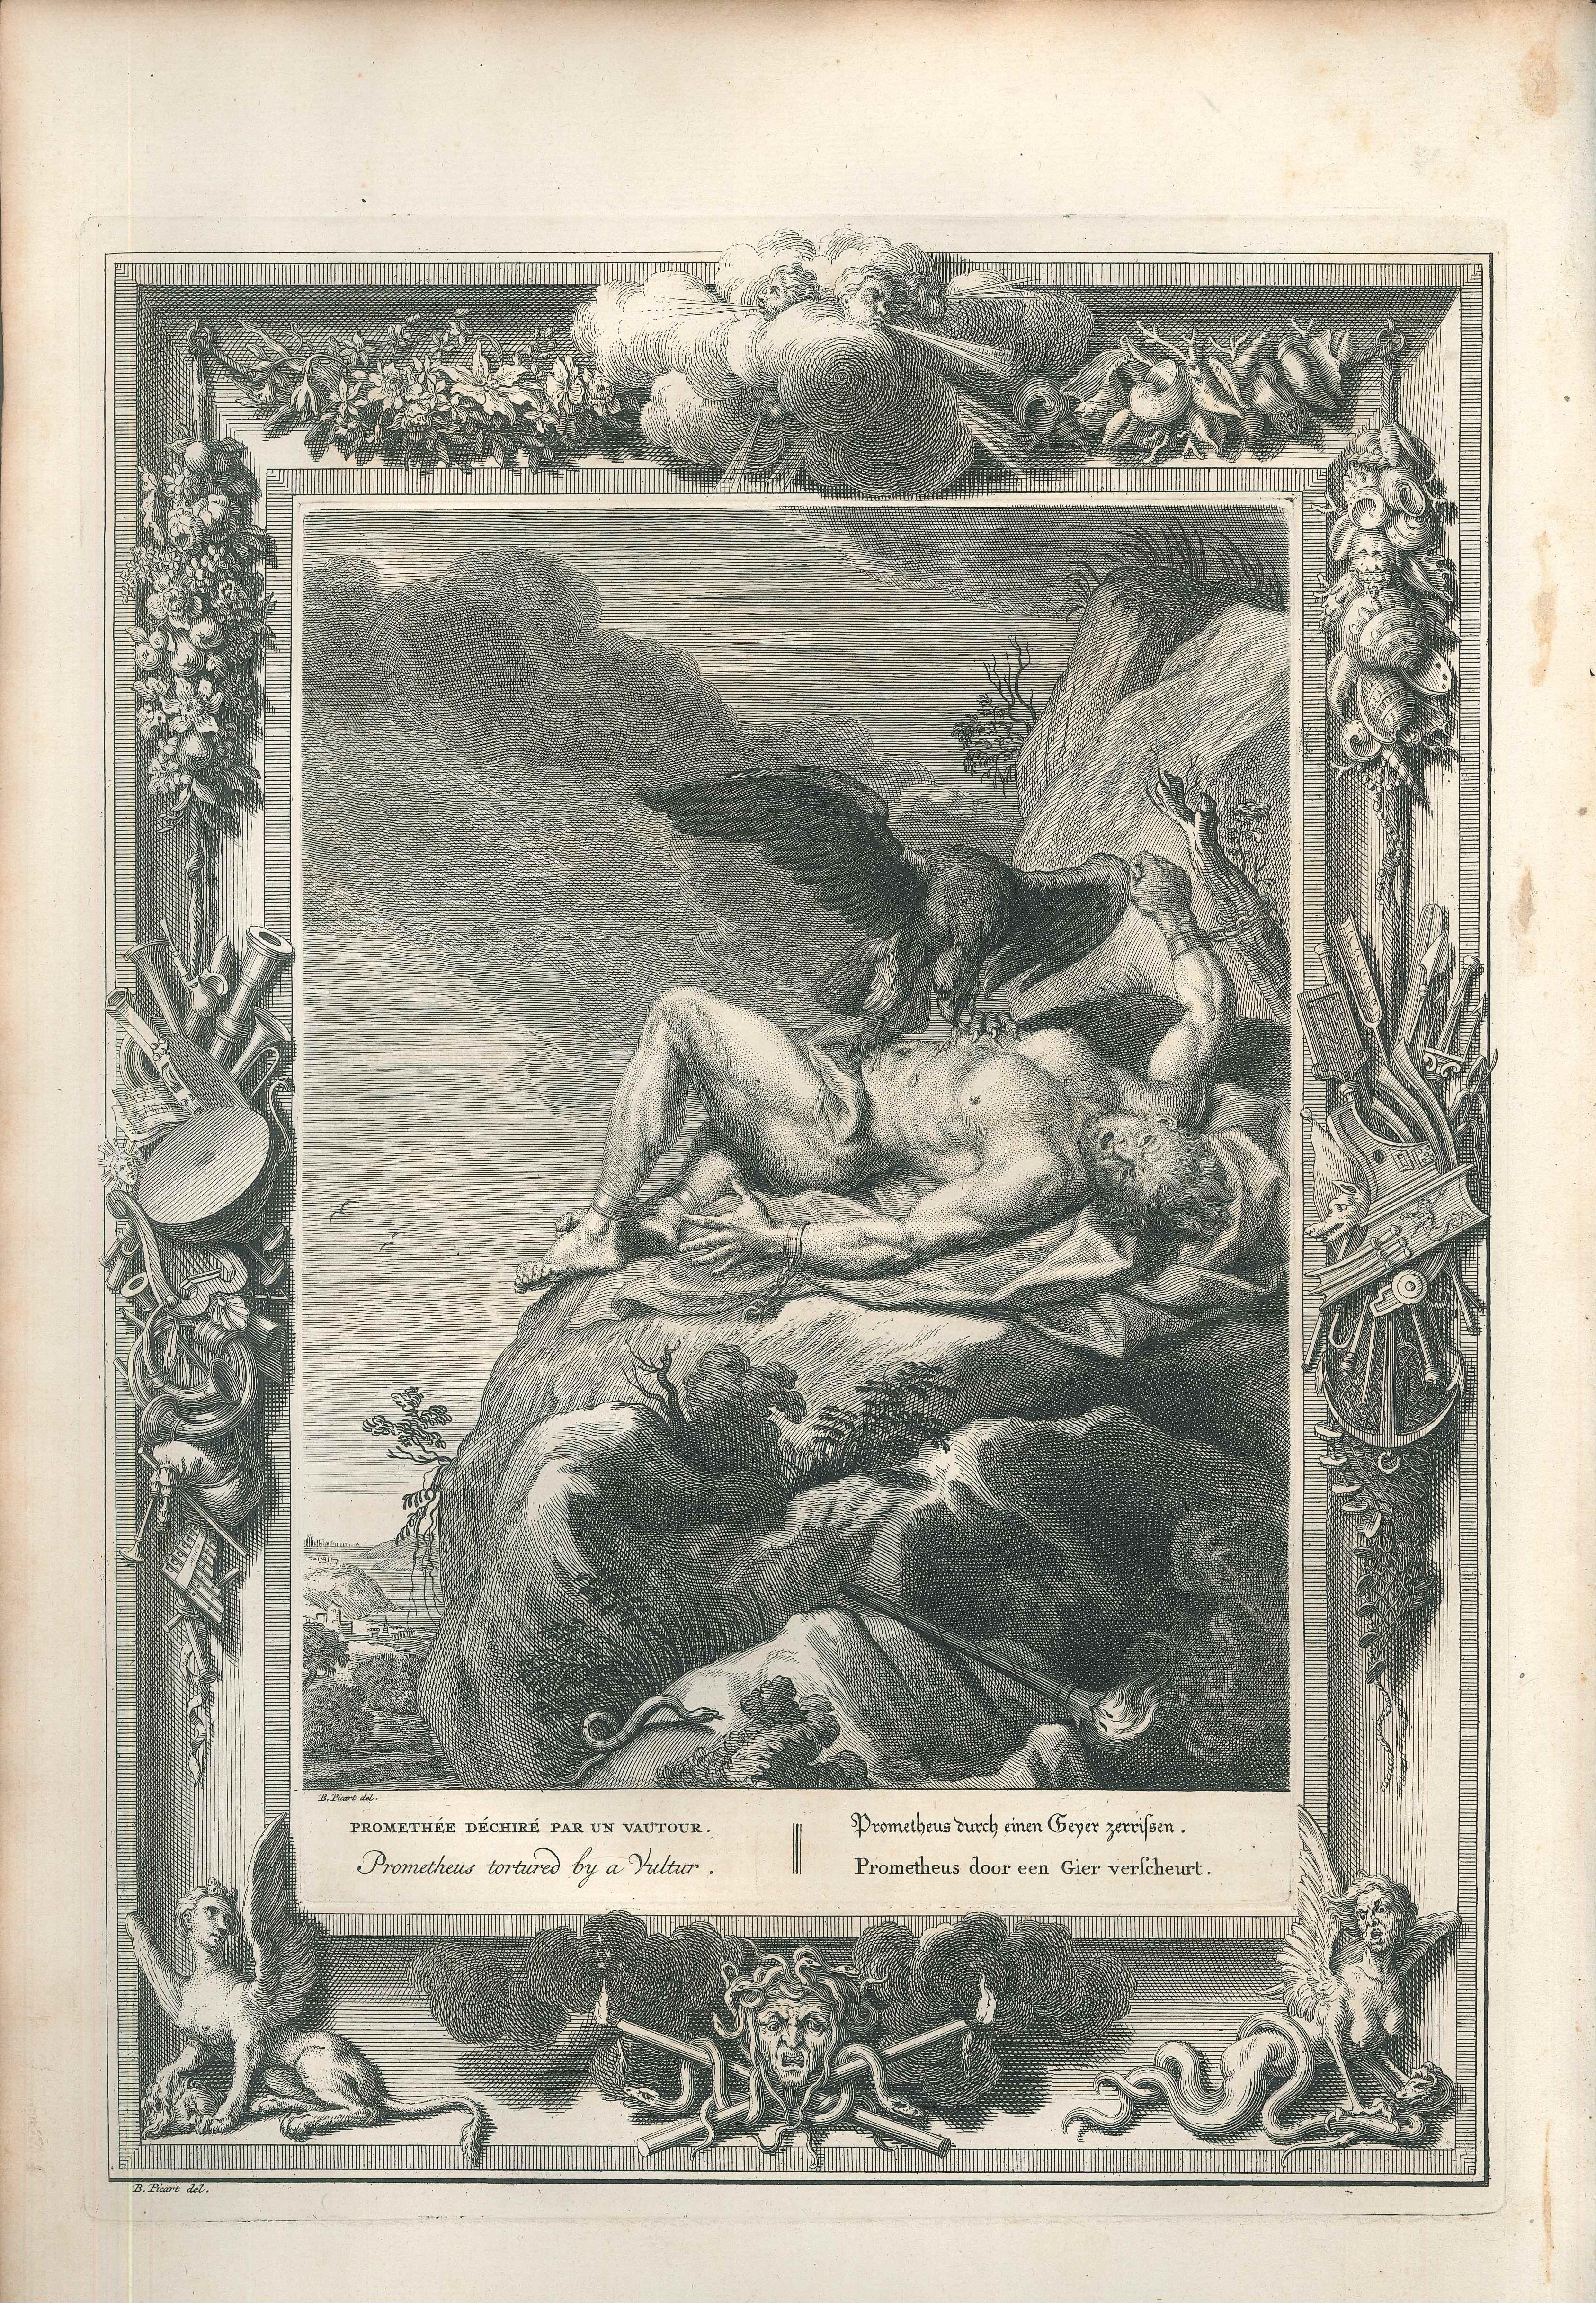 Black and white etching on wire rod paper, representing the Greek myth of Prometheus, tortured by a vultur.

Beautiful plate with fresh impression, from the volume “Le Temple des Muses”, published in Amsterdam in 1742 by Zacharias Chatelain. Capture